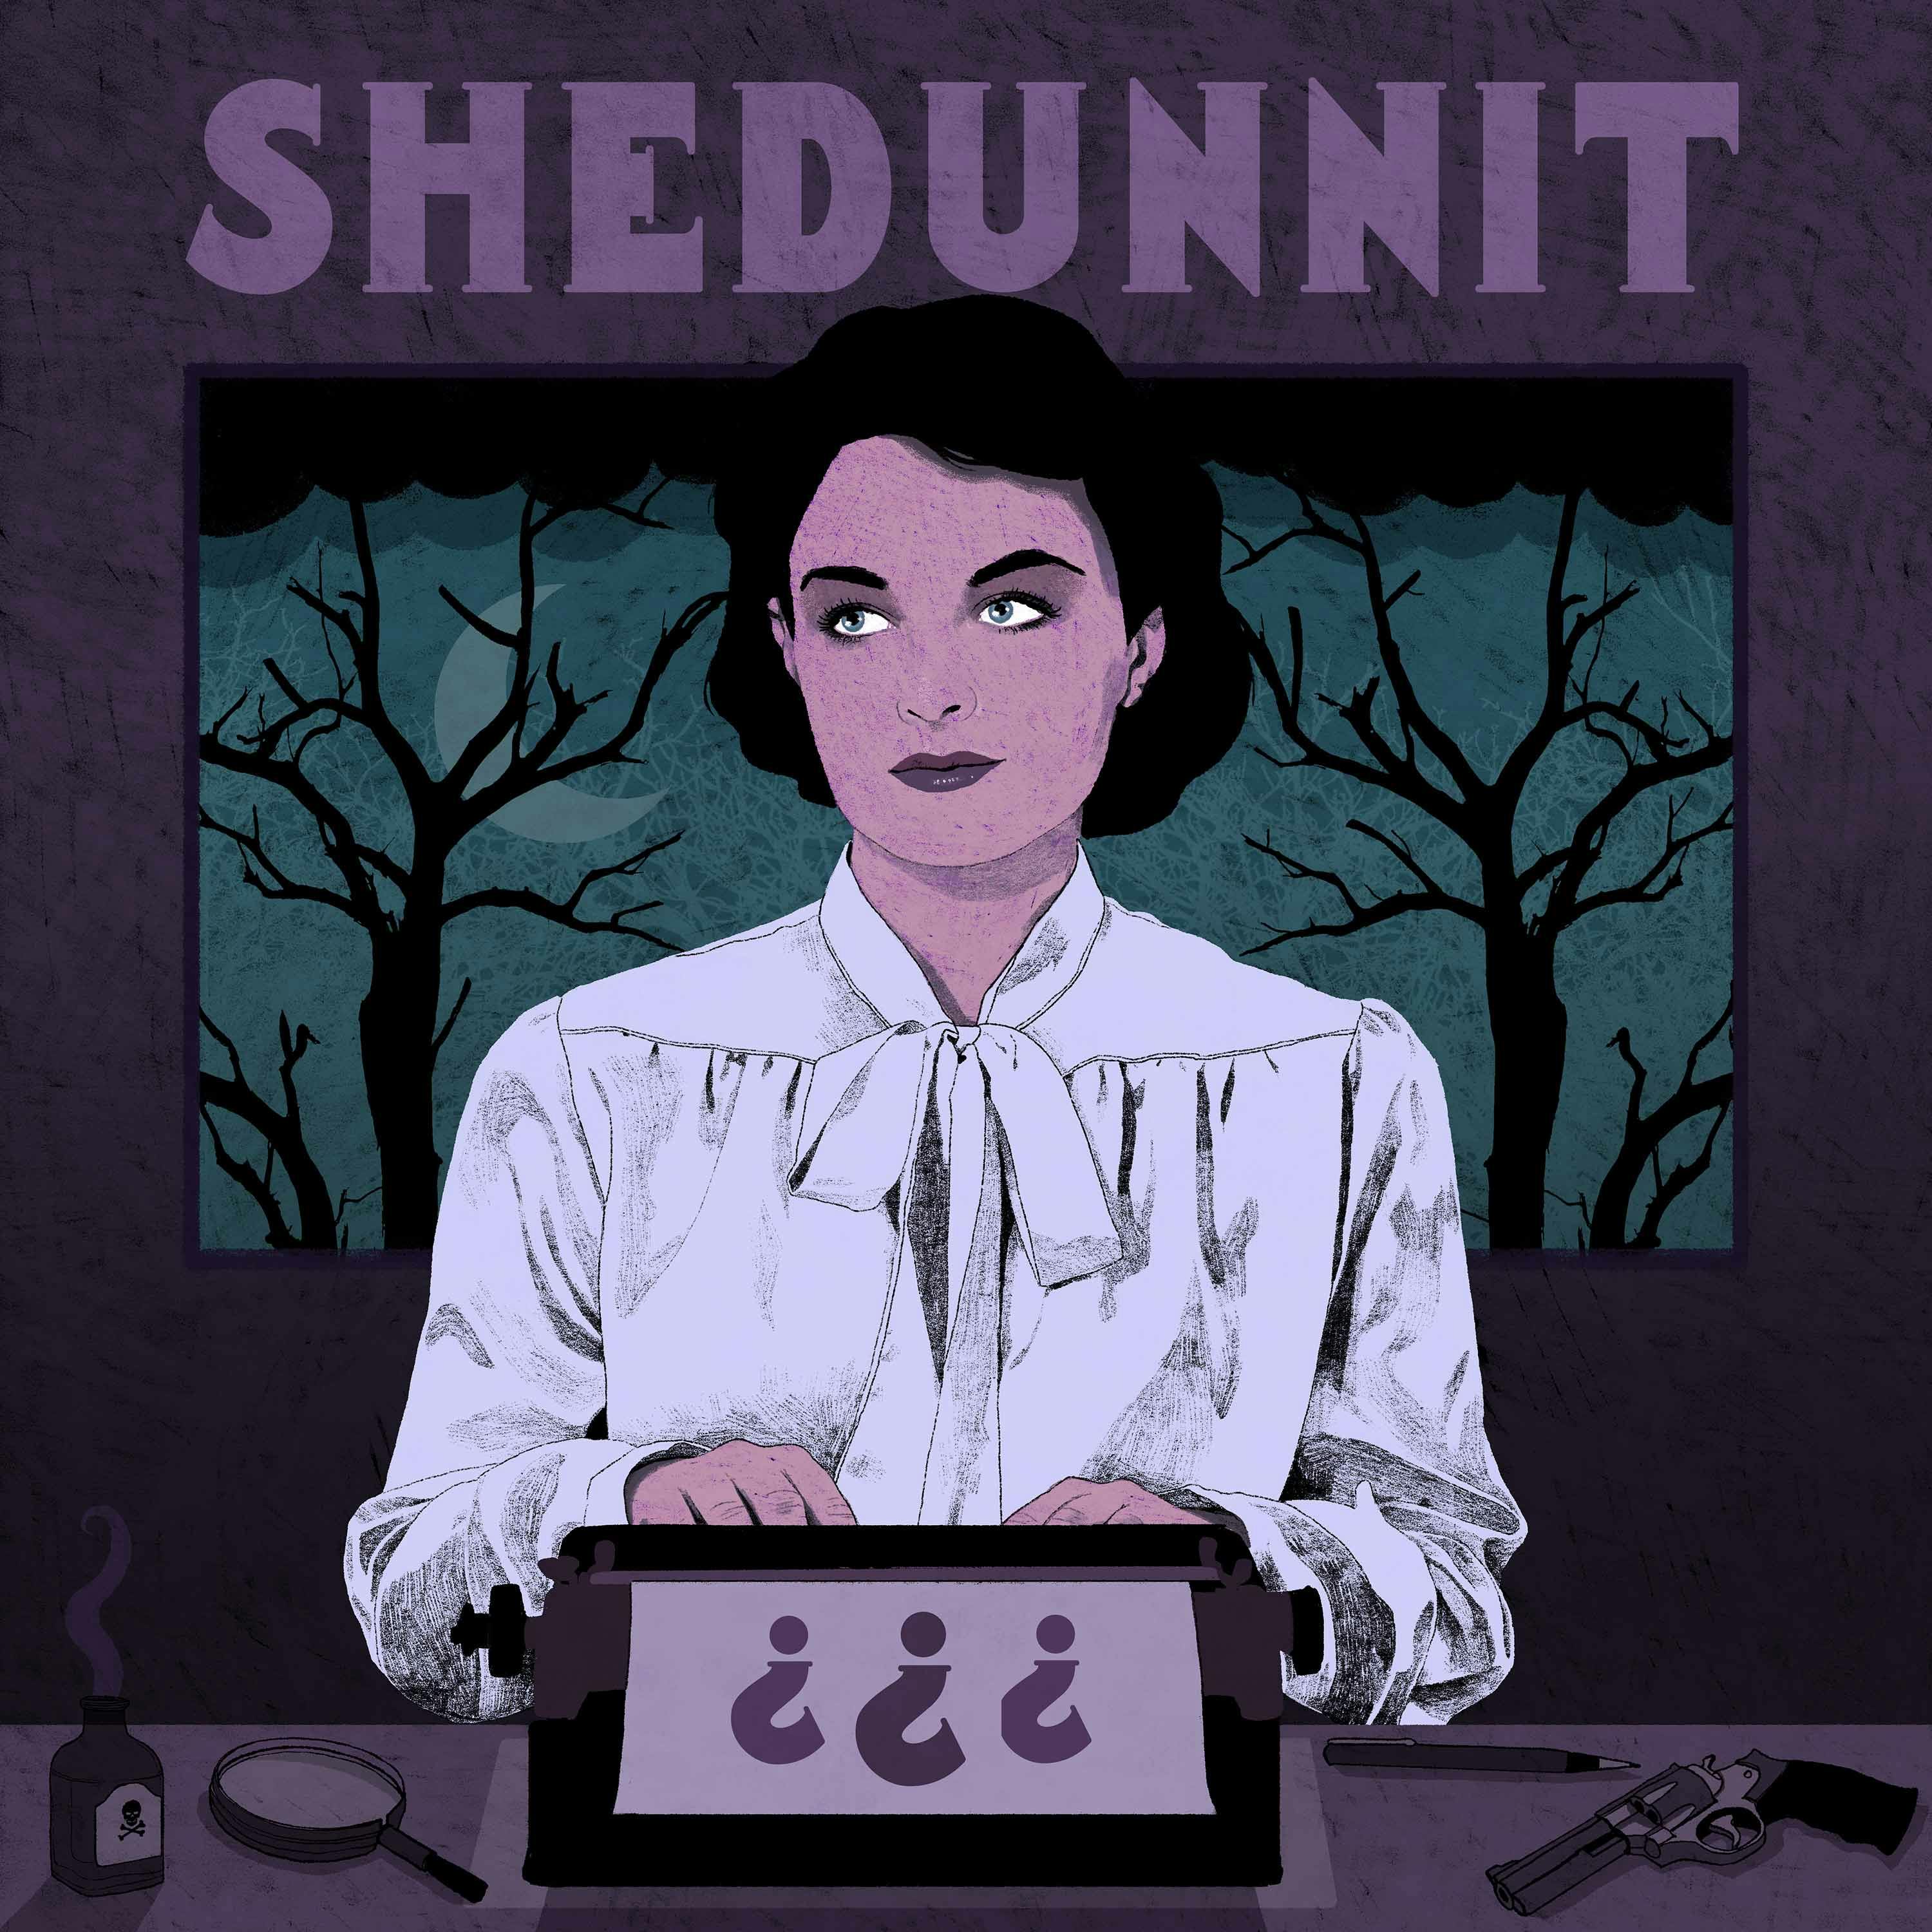 The Shedunnit Centenary